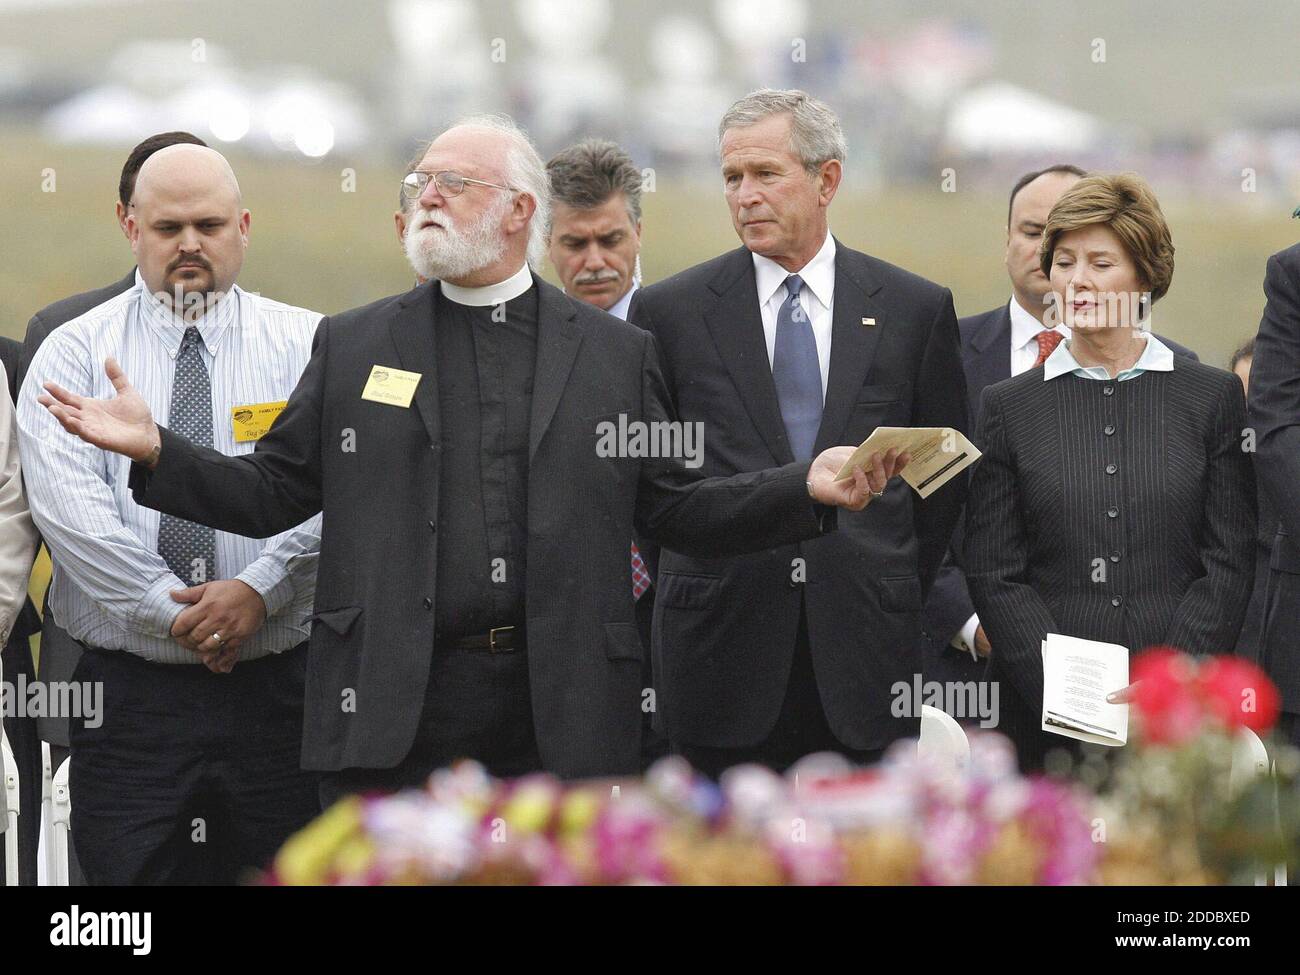 NO FILM, NO VIDEO, NO TV, NO DOCUMENTARY - Reverend Paul Britton, brother of Marion Britton, who was killed on Flight 93, delivers an invocation as President George W. Bush and First Lady Laura Bush meet with families at the Flight 93 crash site in Shanksville, Pennsylvania during the fifth anniversary of the 9/11 terrorist attacks on September 11, 2006. Photo by Laurence Kesterson/Philadelphia Inquirer/MCT/ABACAPRESS.COM Stock Photo